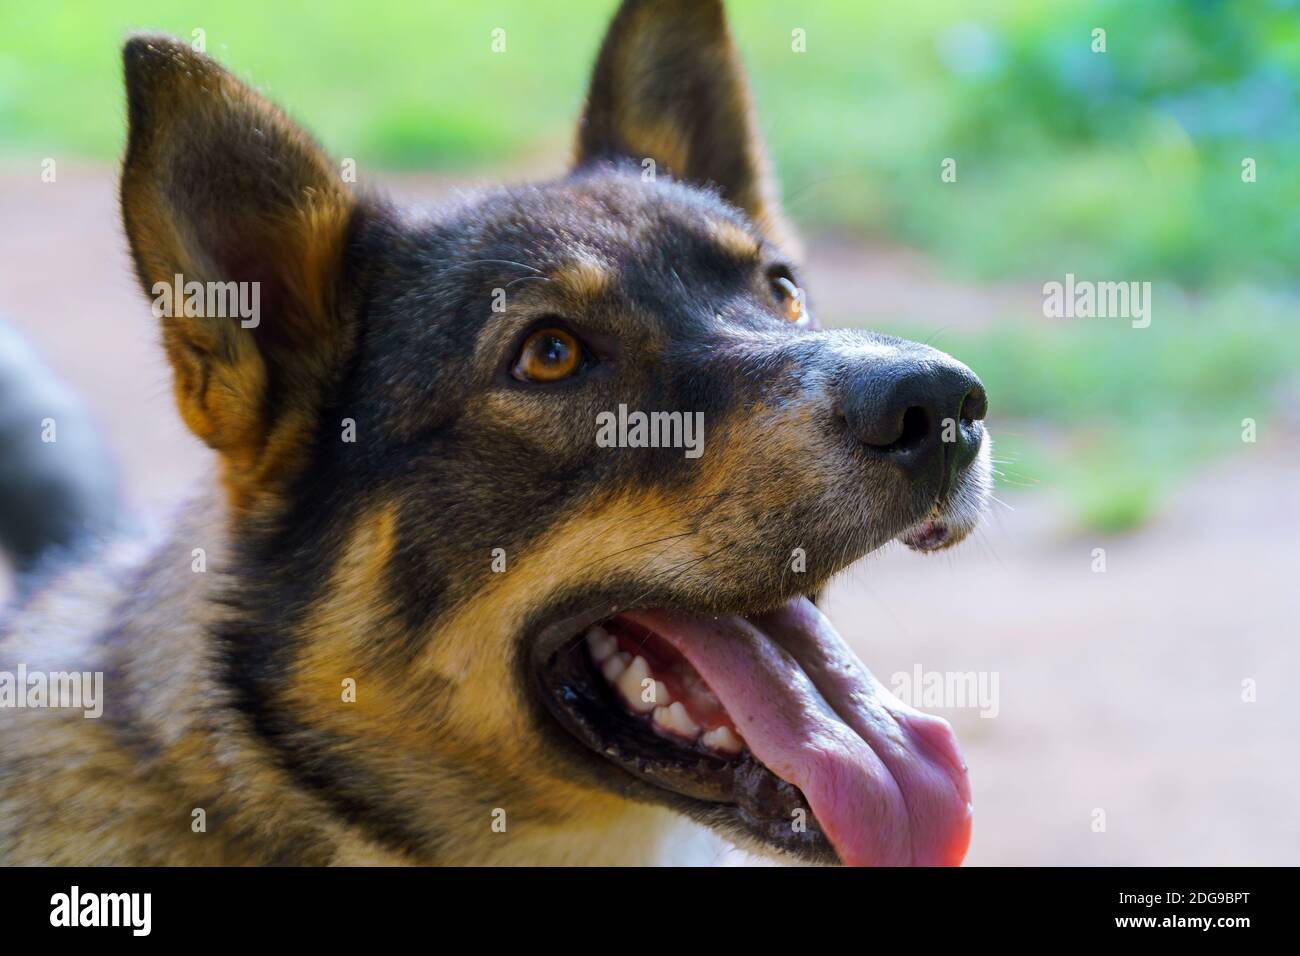 Close-up view of a shepherd dog looking and tongue tiring with playfulness near home. Stock Photo